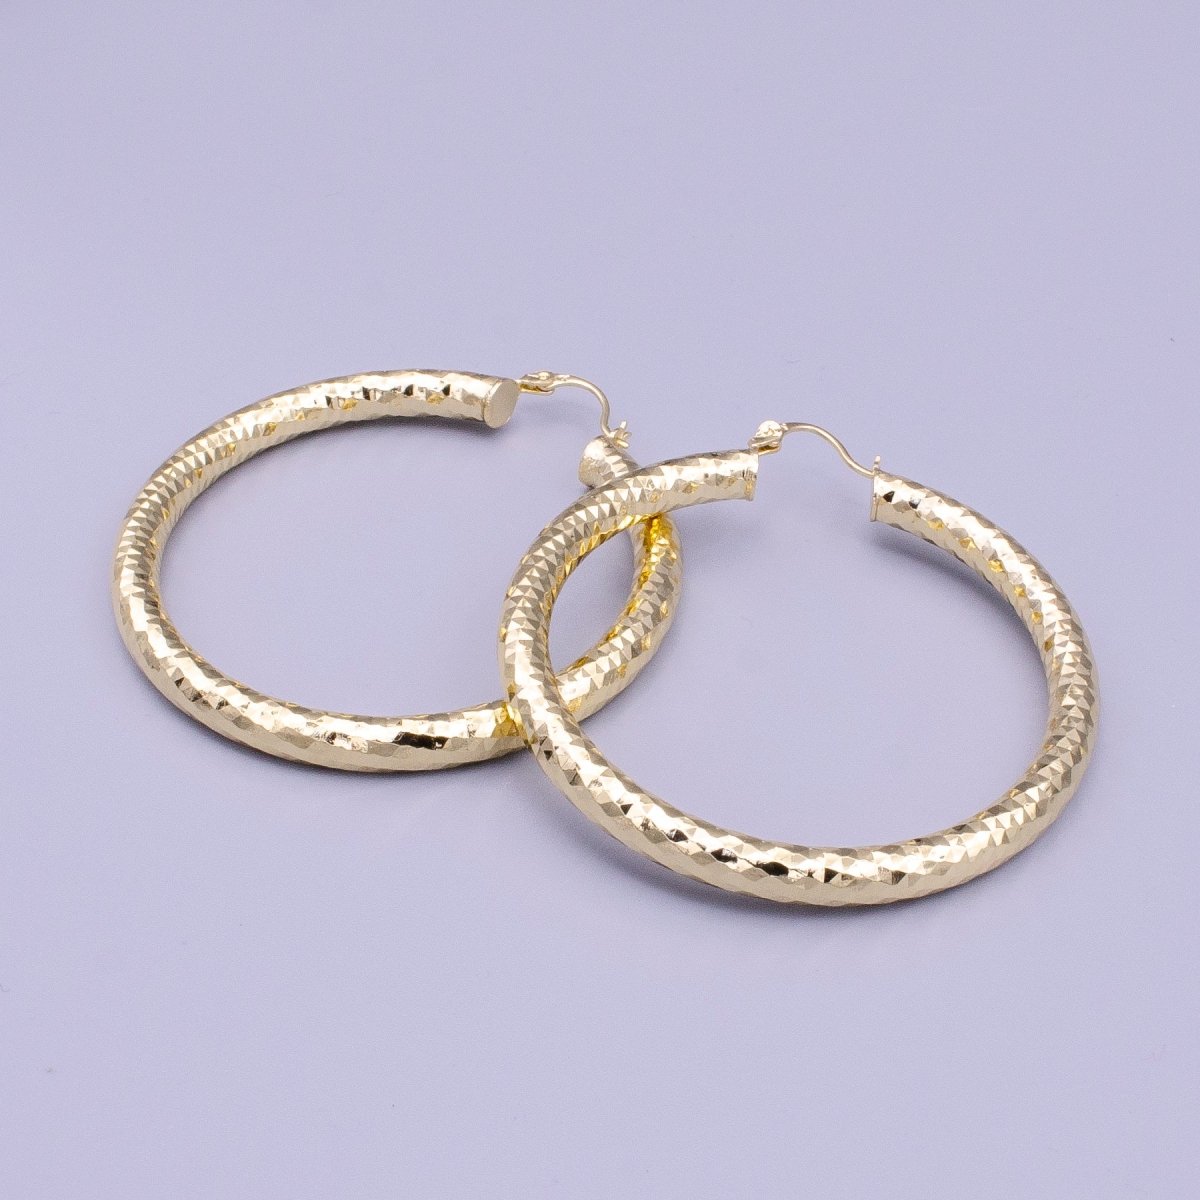 14K Gold Filled 25mm, 35mm, 45mm, 55mm Triangle Multifaceted French Lock Latch Earrings | AE059 - AE062 - DLUXCA